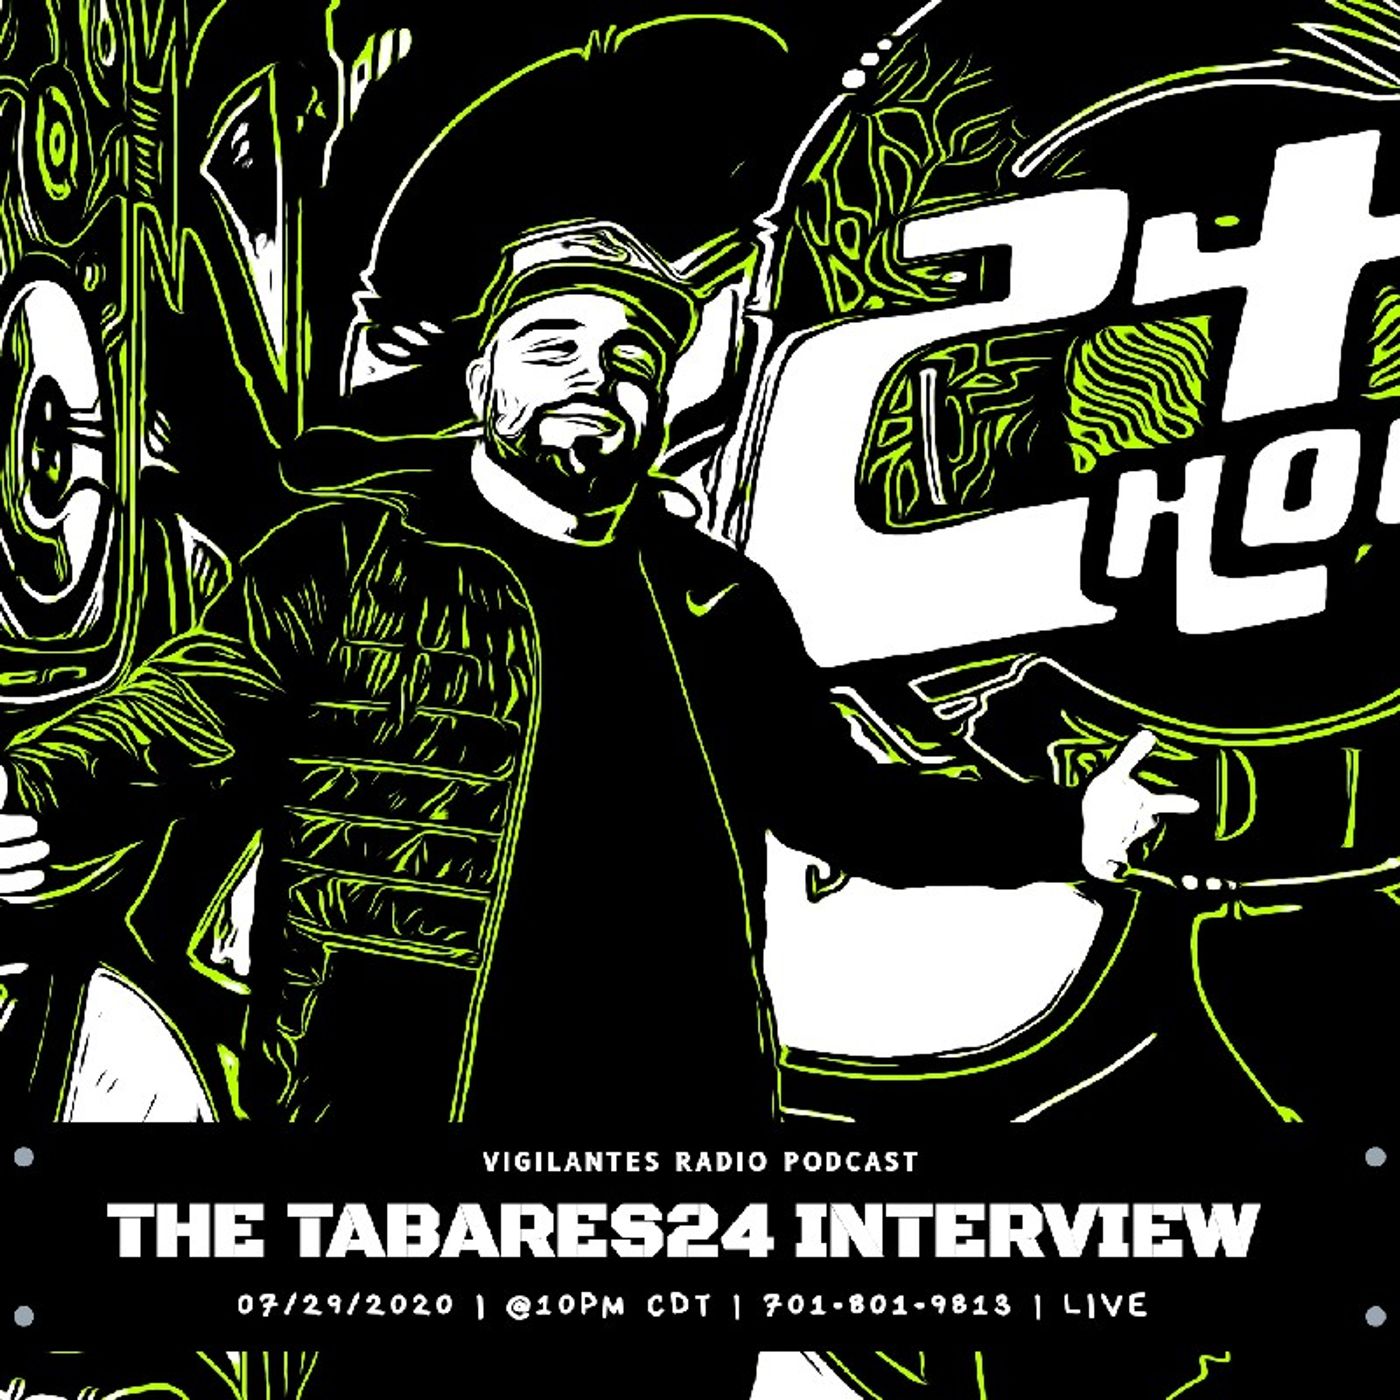 The Tabares24 Interview. Image